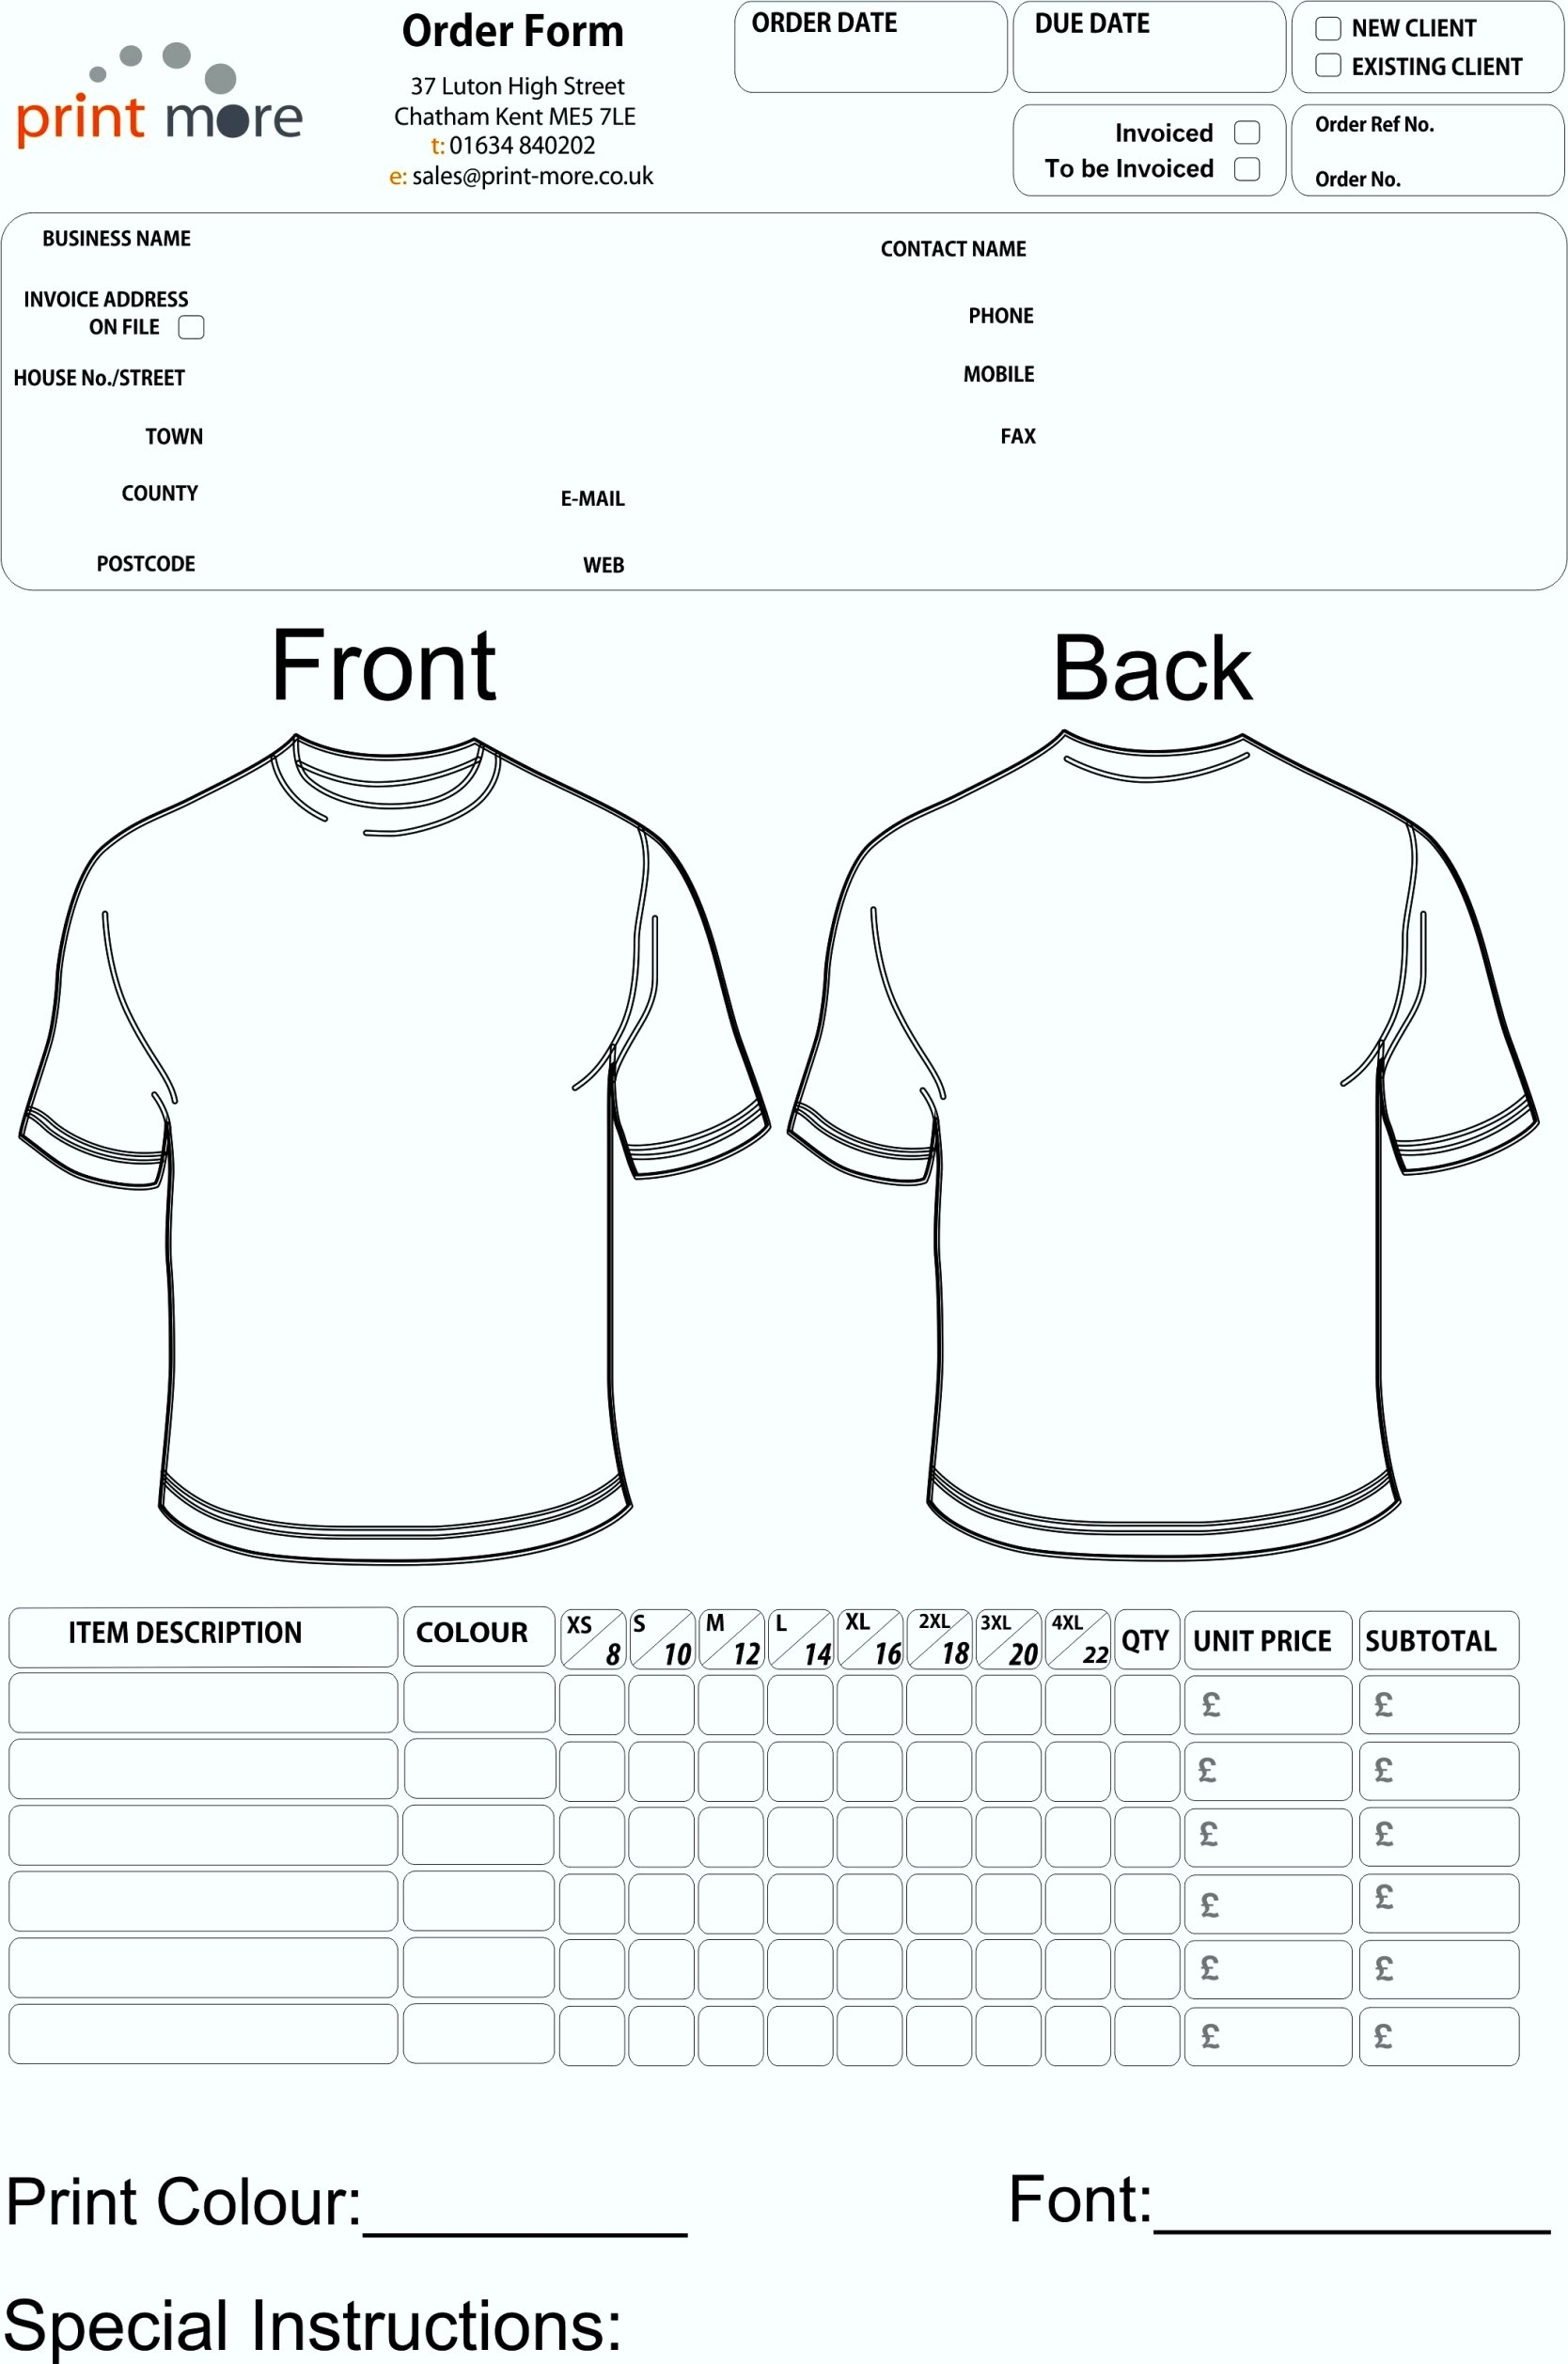 9 Printable Order Form Template | Pay Stub Free Templates Image - Free Printable Order Forms